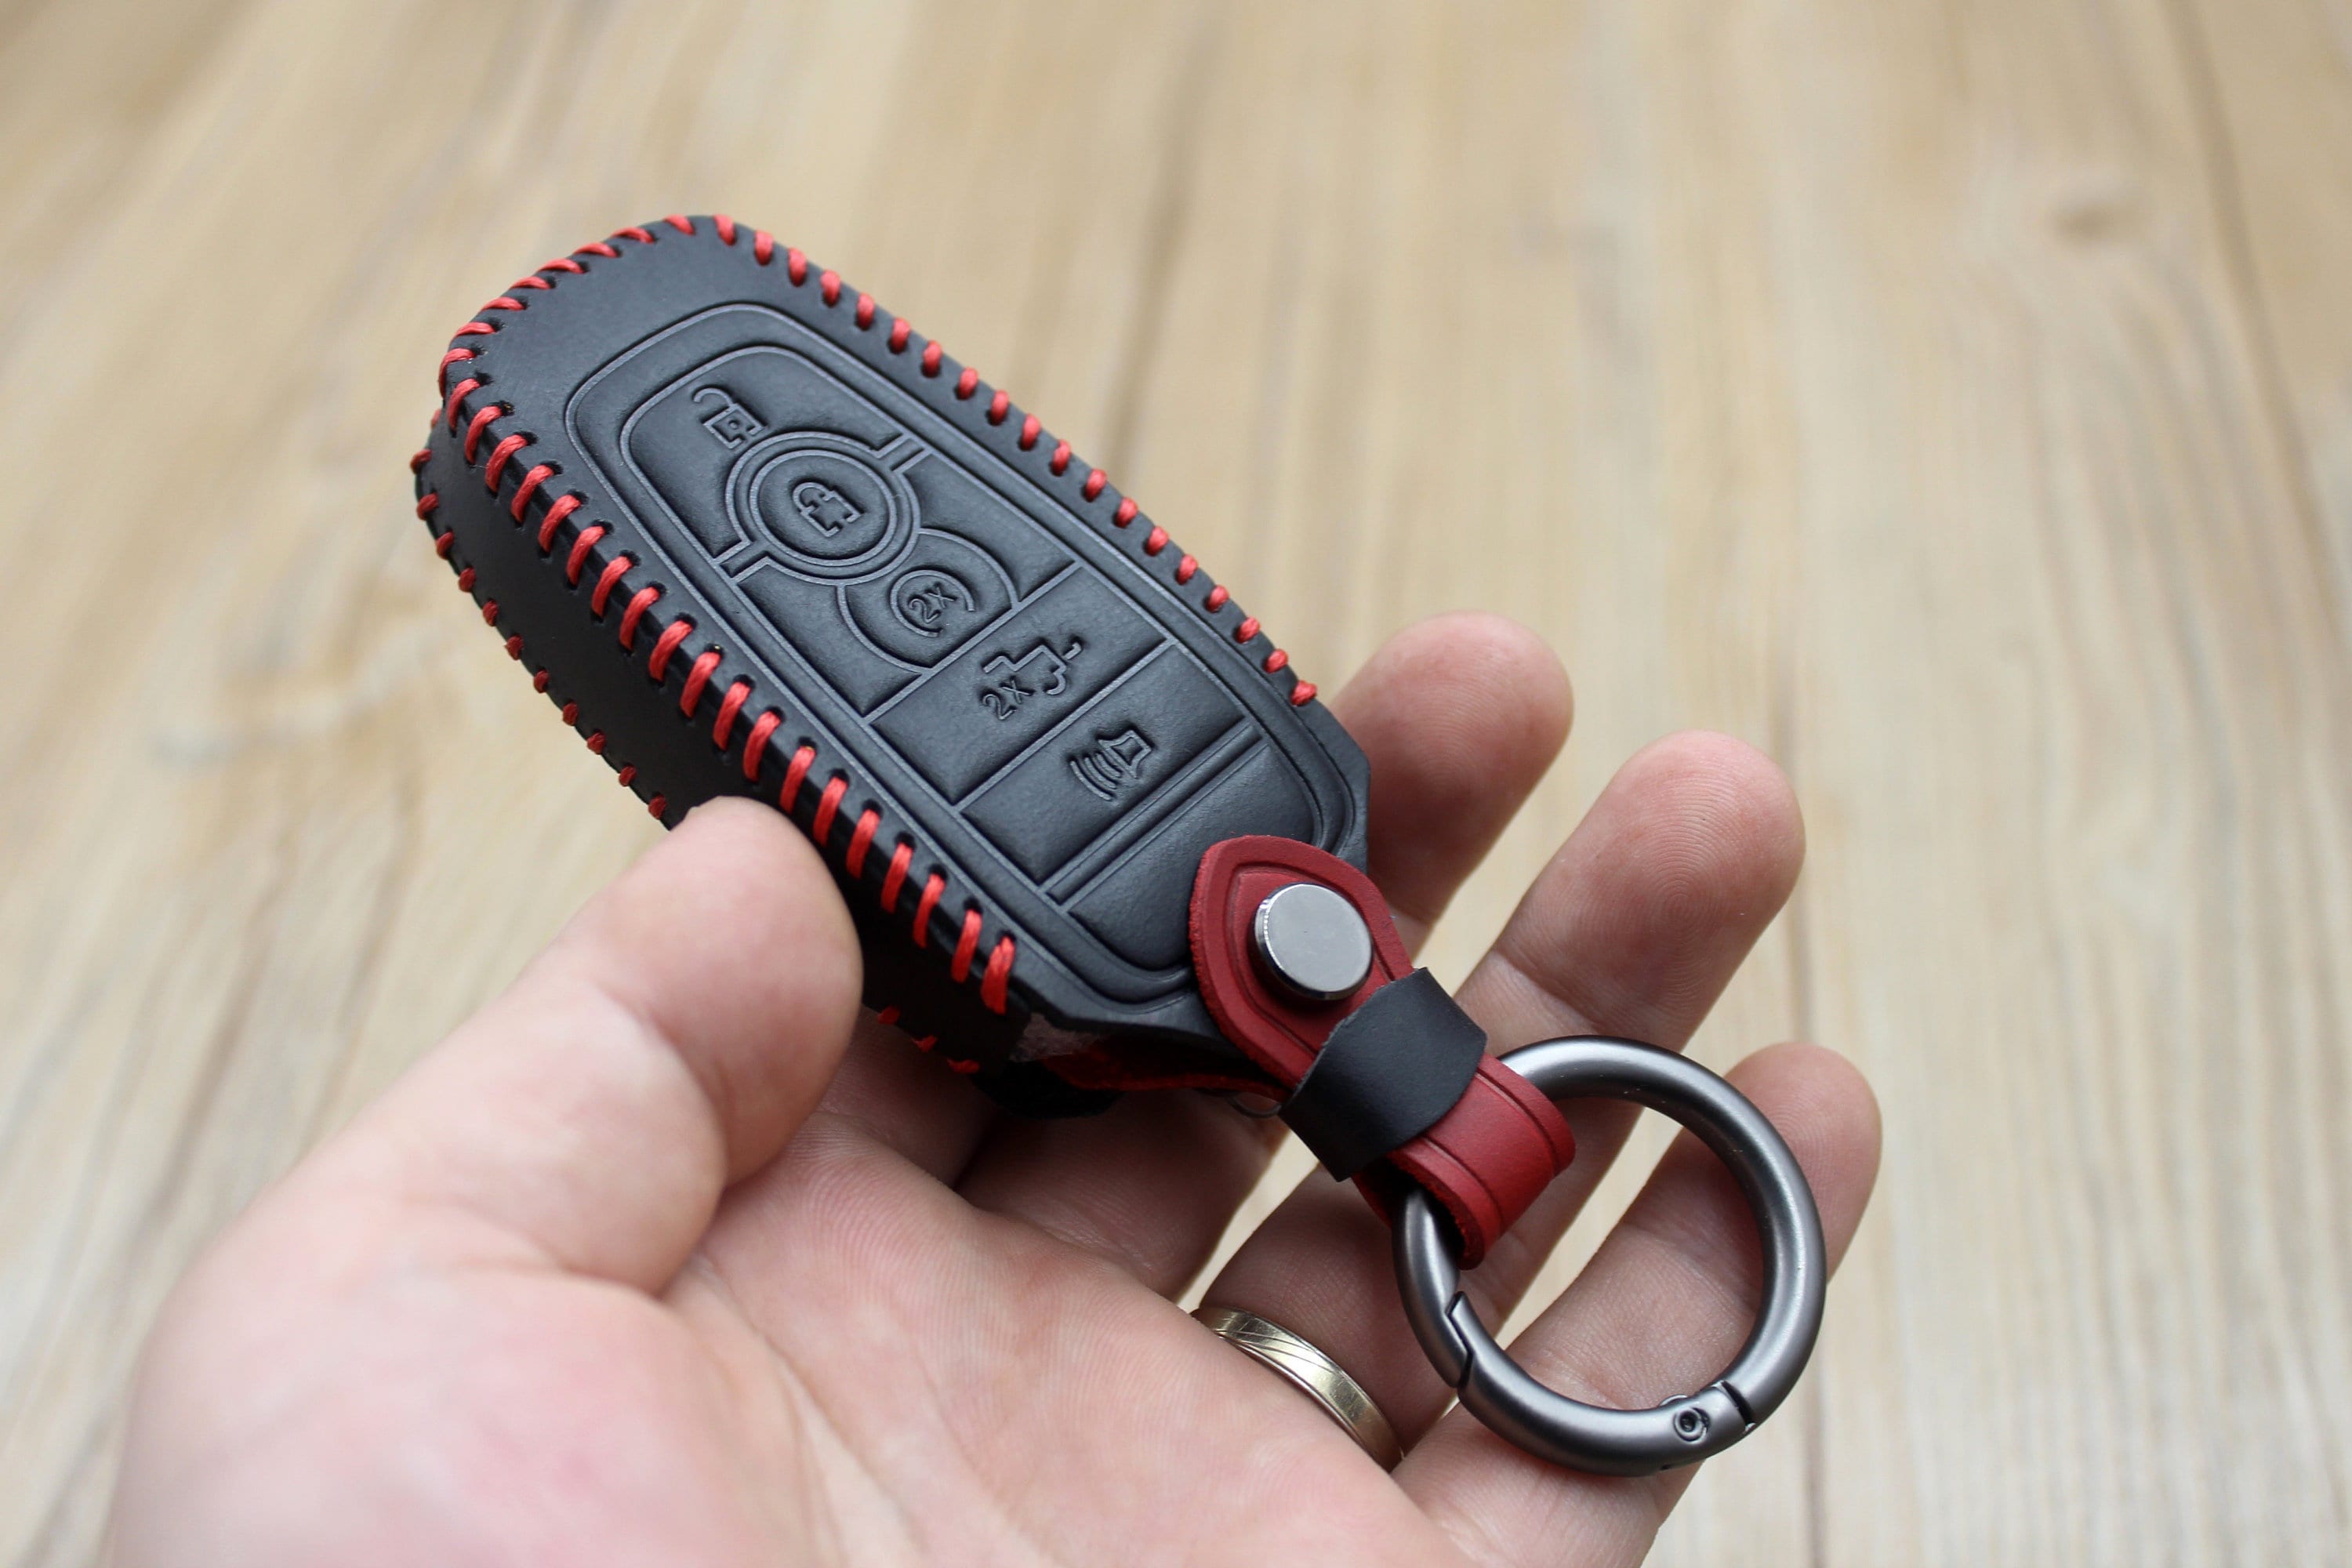 Ford Key Fob Cover 